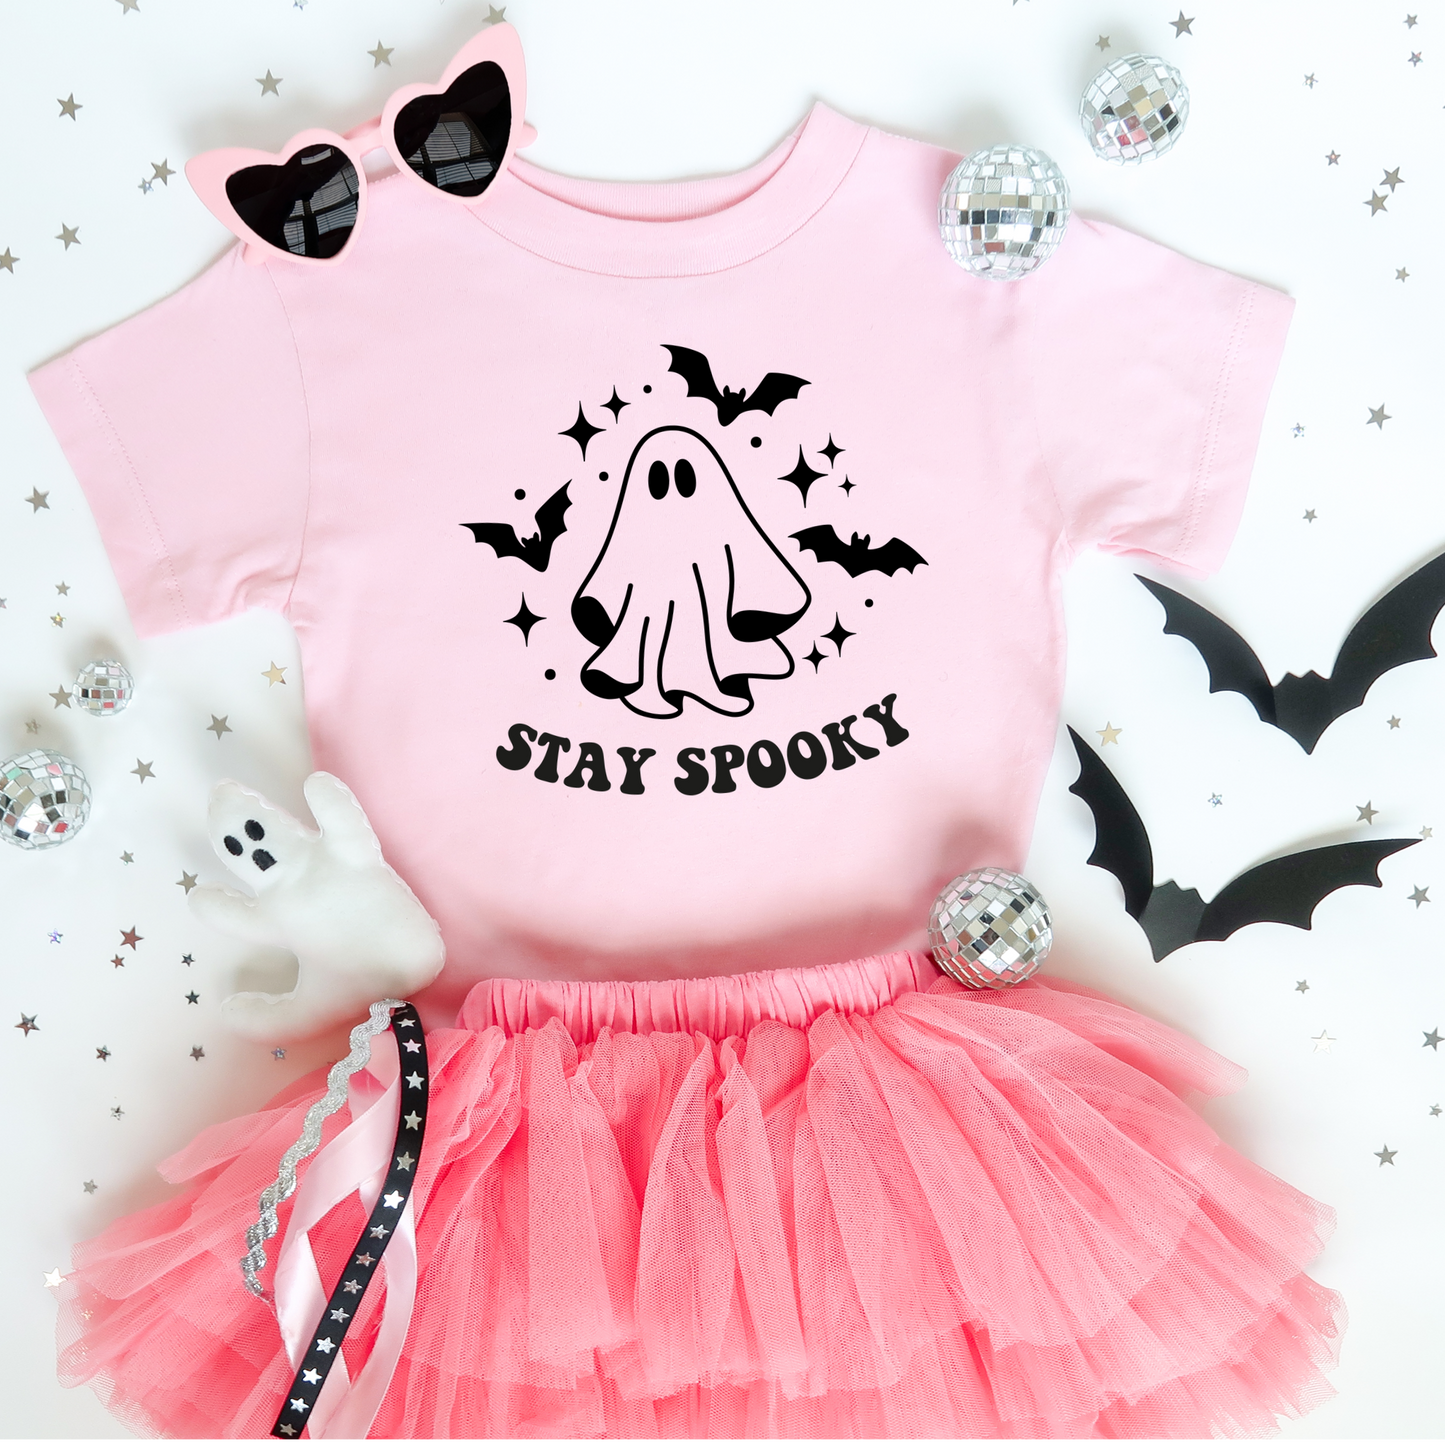 Ghost, bats, stars, and the phrase "Stay Spooky" DTF and Sublimation iron on heat transfer.